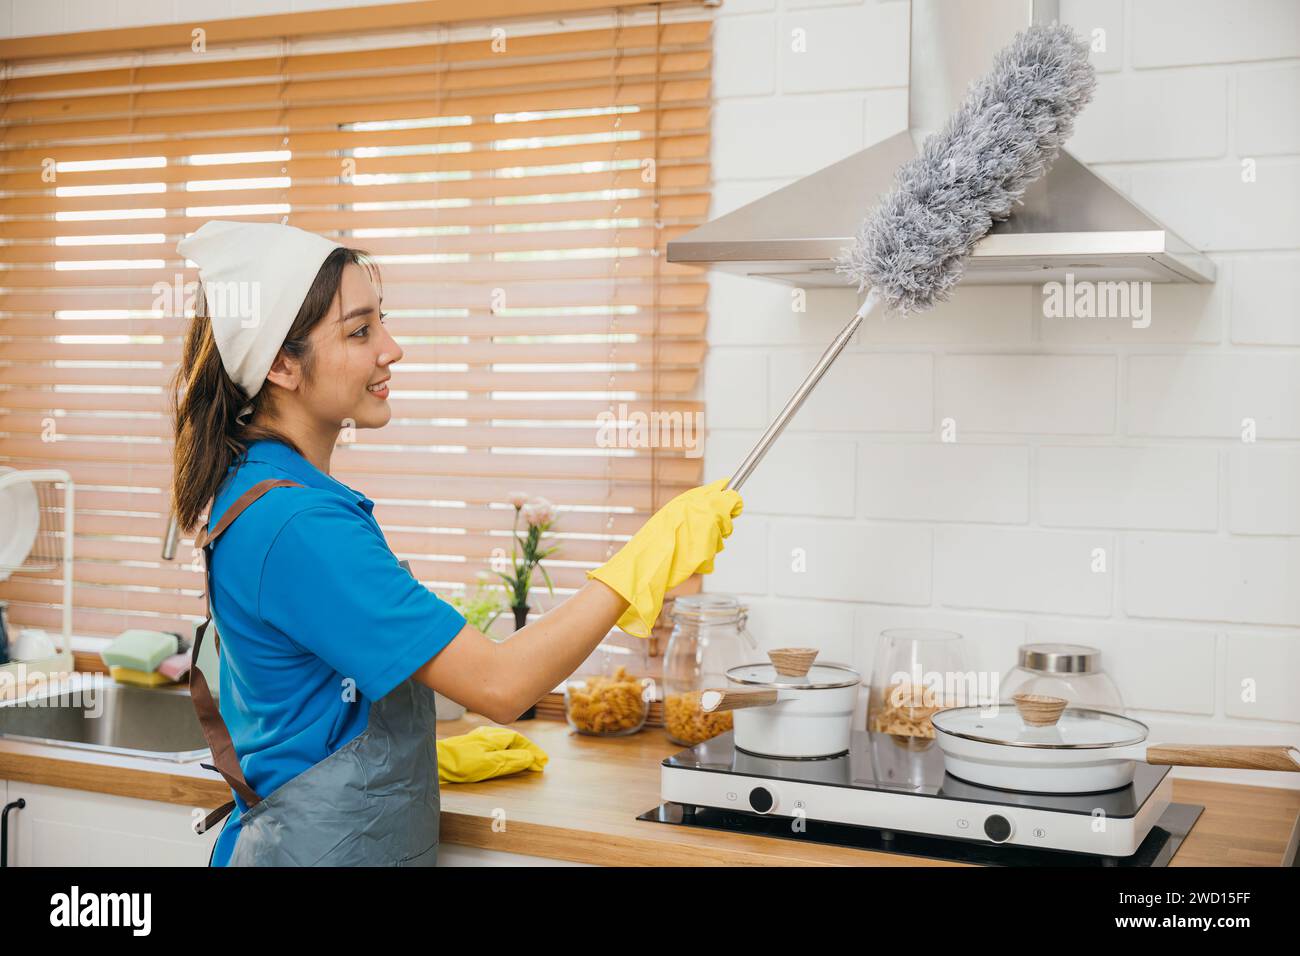 Maid in workwear and gloves cleans home dusts kitchen ventilation. Emphasizing modern housework Stock Photo